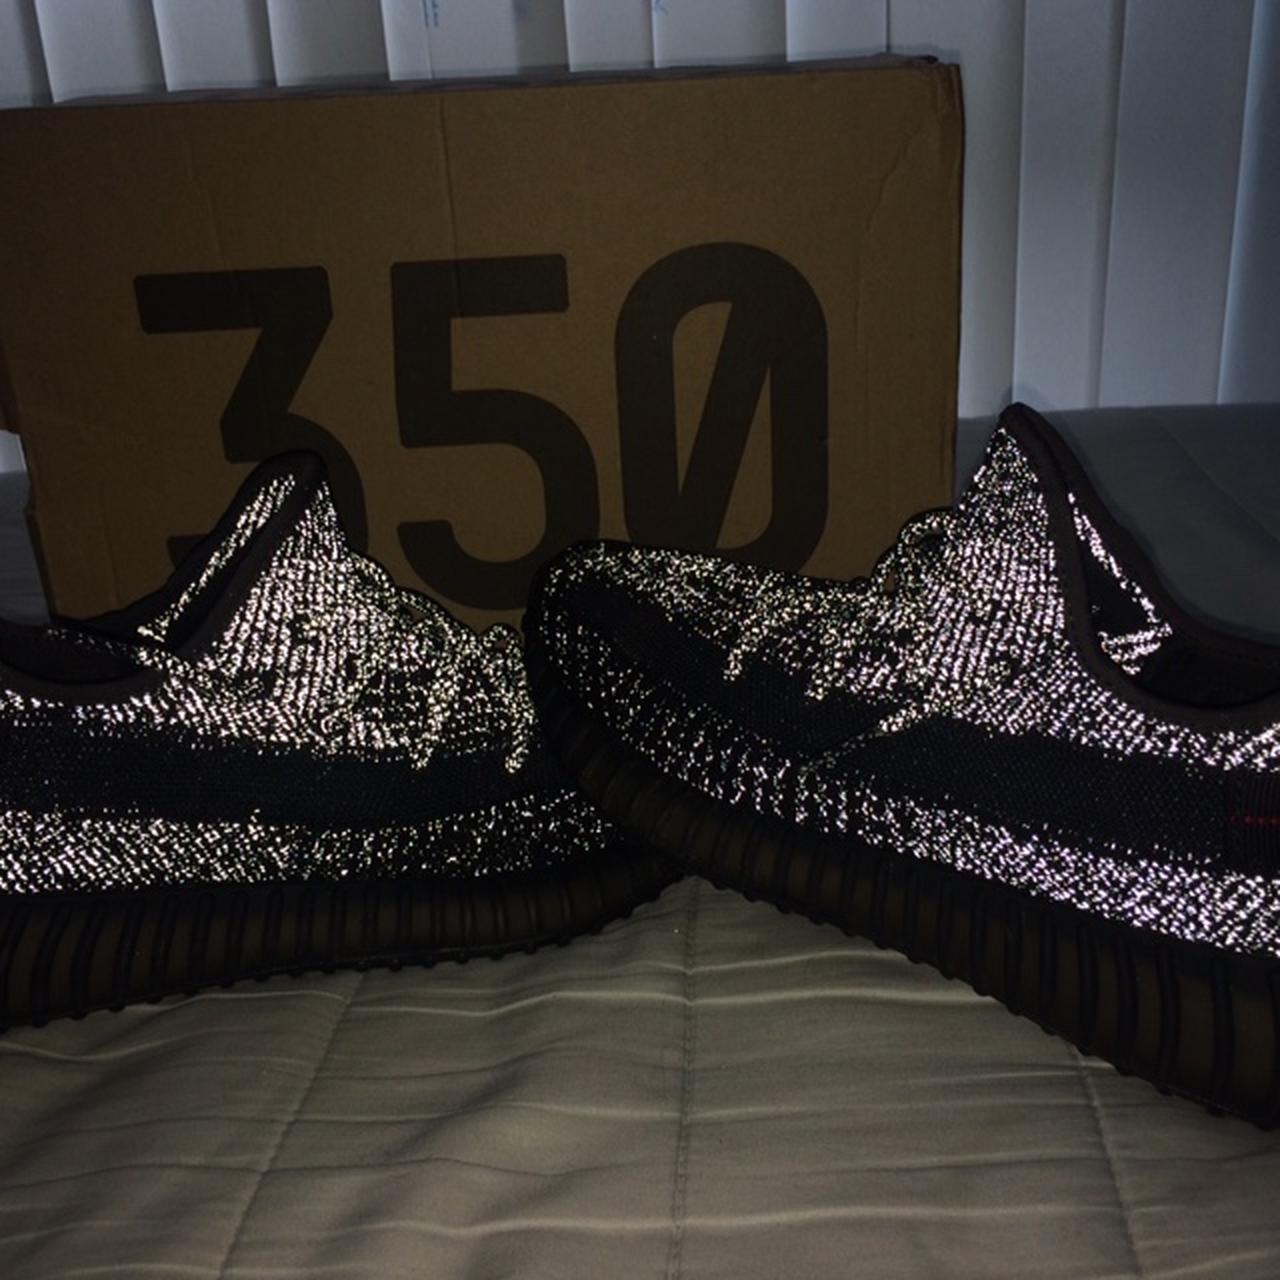 Adidas Yeezy Boost 350 v2 Supreme Comes new In Box - Depop